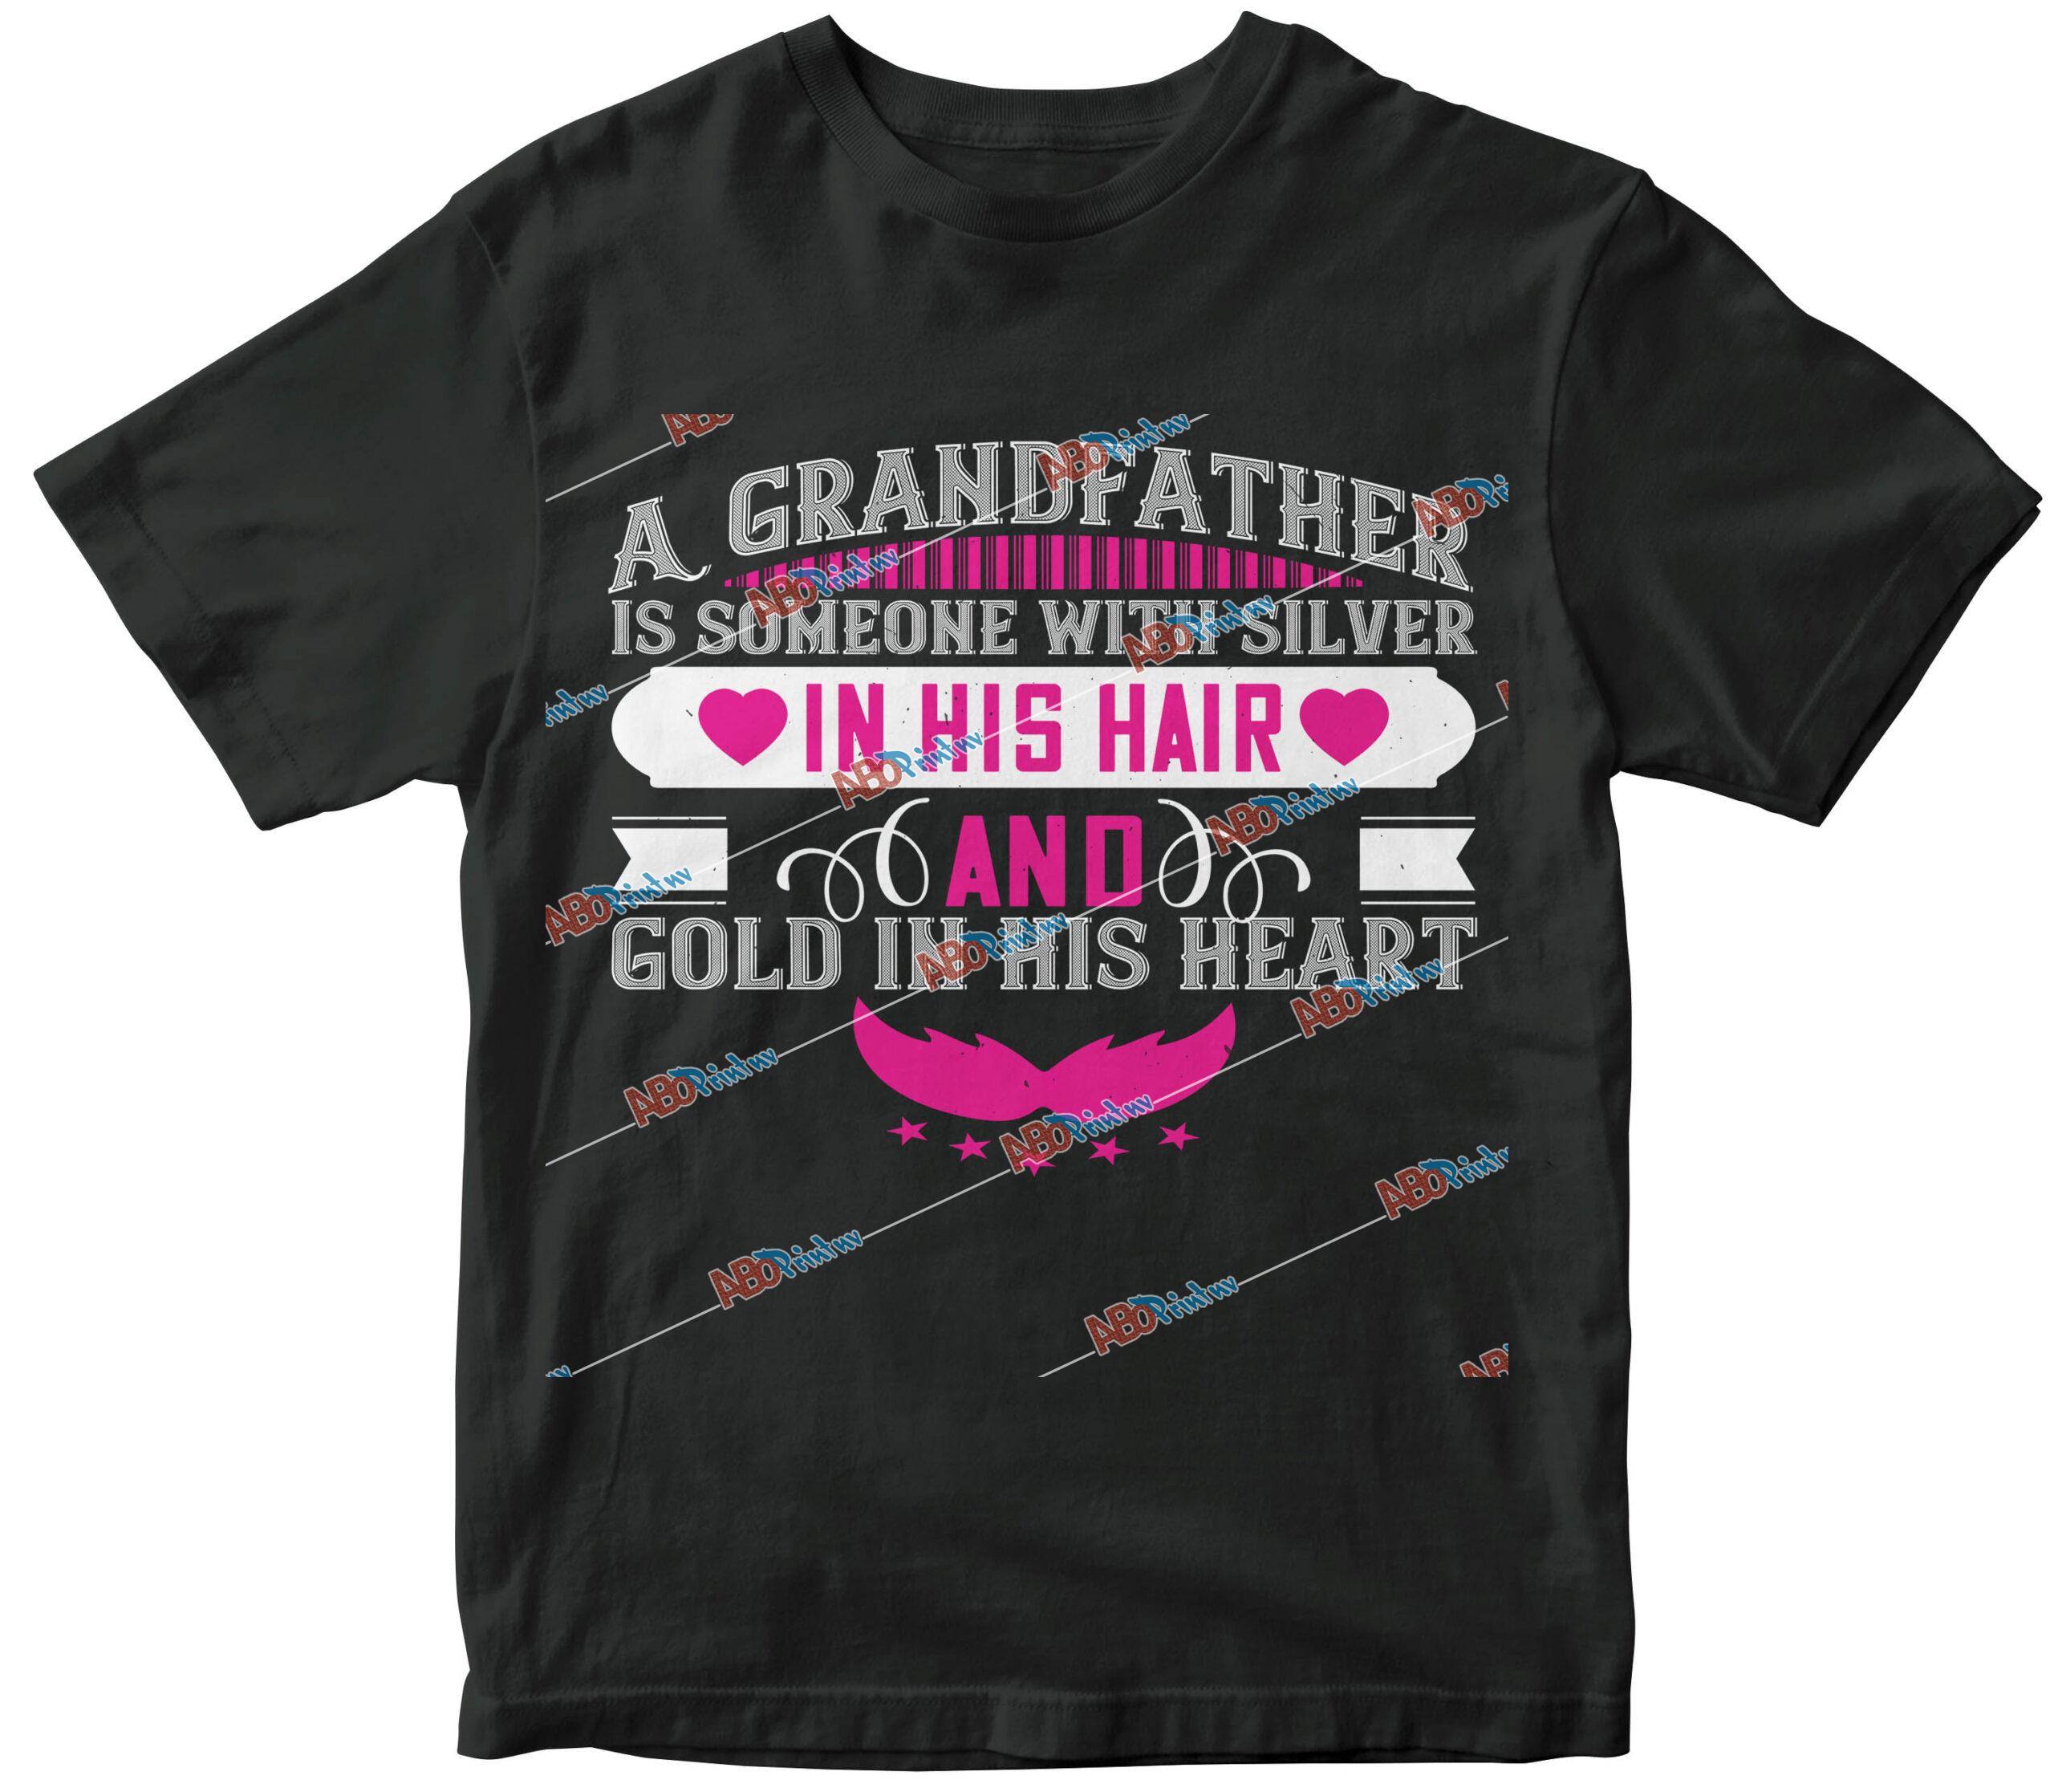 A grandfather is someone with silver in his hair and gold in his heart-02.jpg